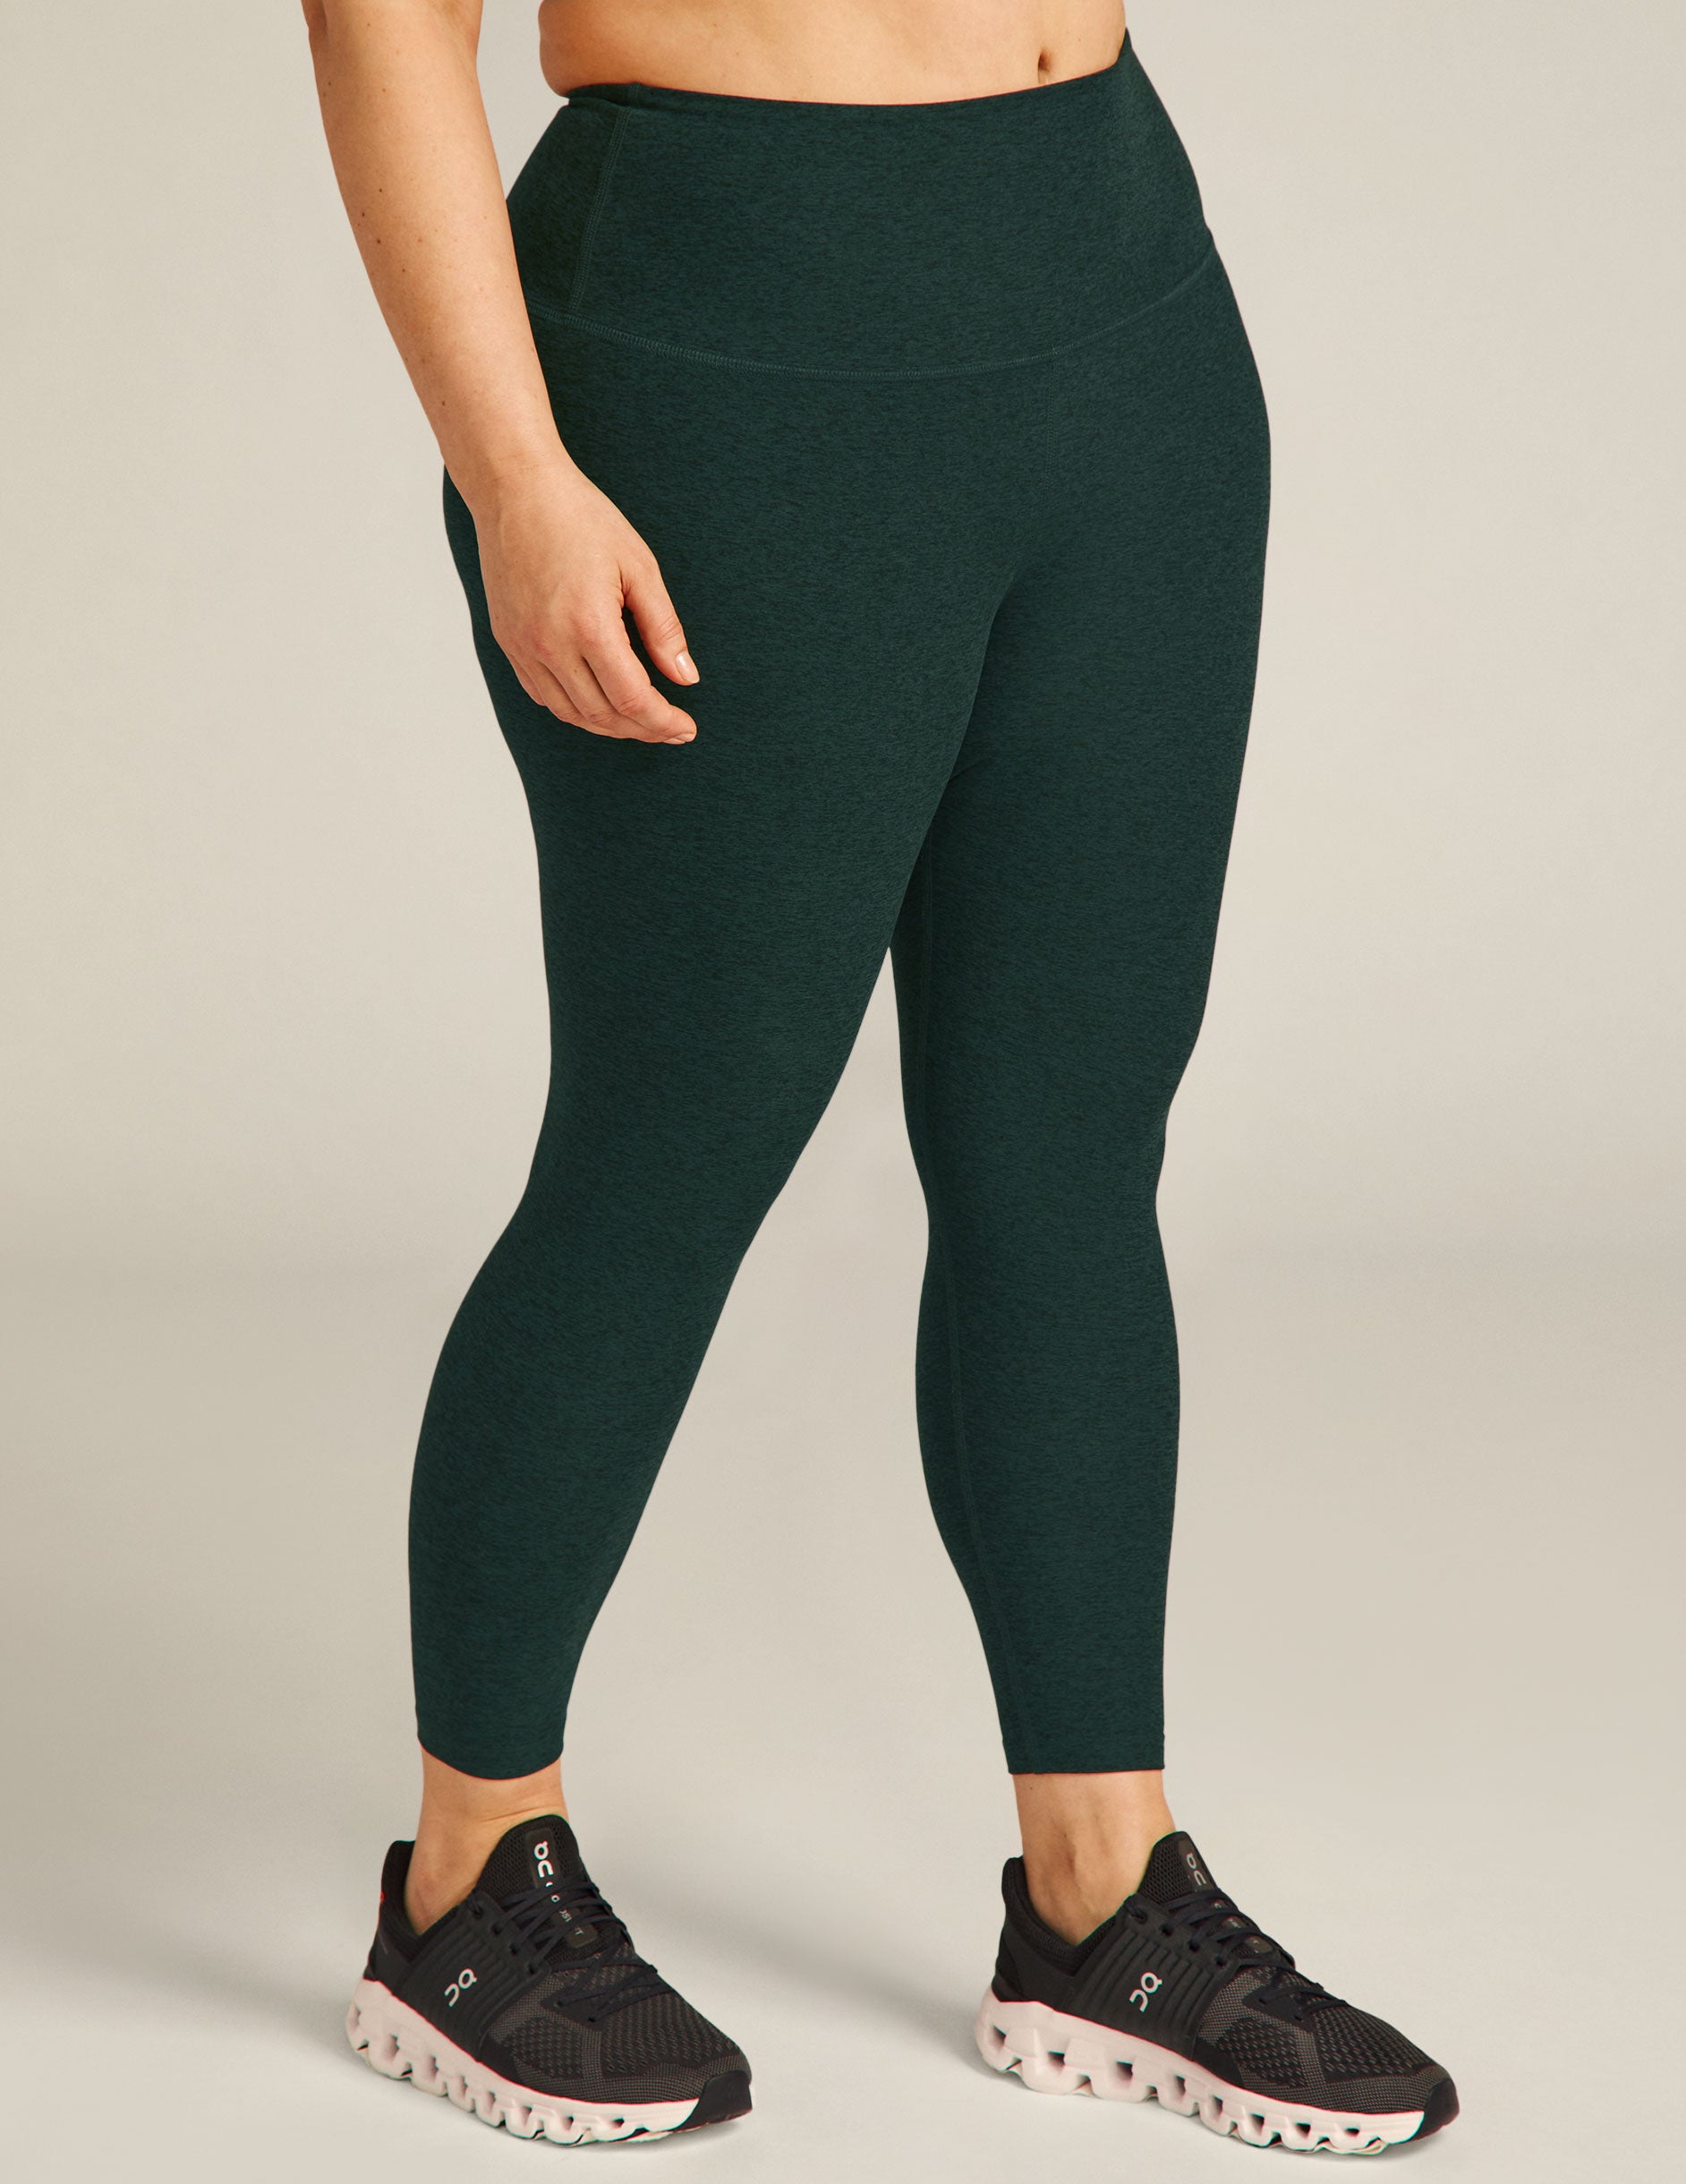 Buy Beyond Yoga Plus Size High Waisted Midi Leggings for Women - Soft  Fabrication with High-Rise Elastic Waistband, Vetiver Green/Pine, 3X at